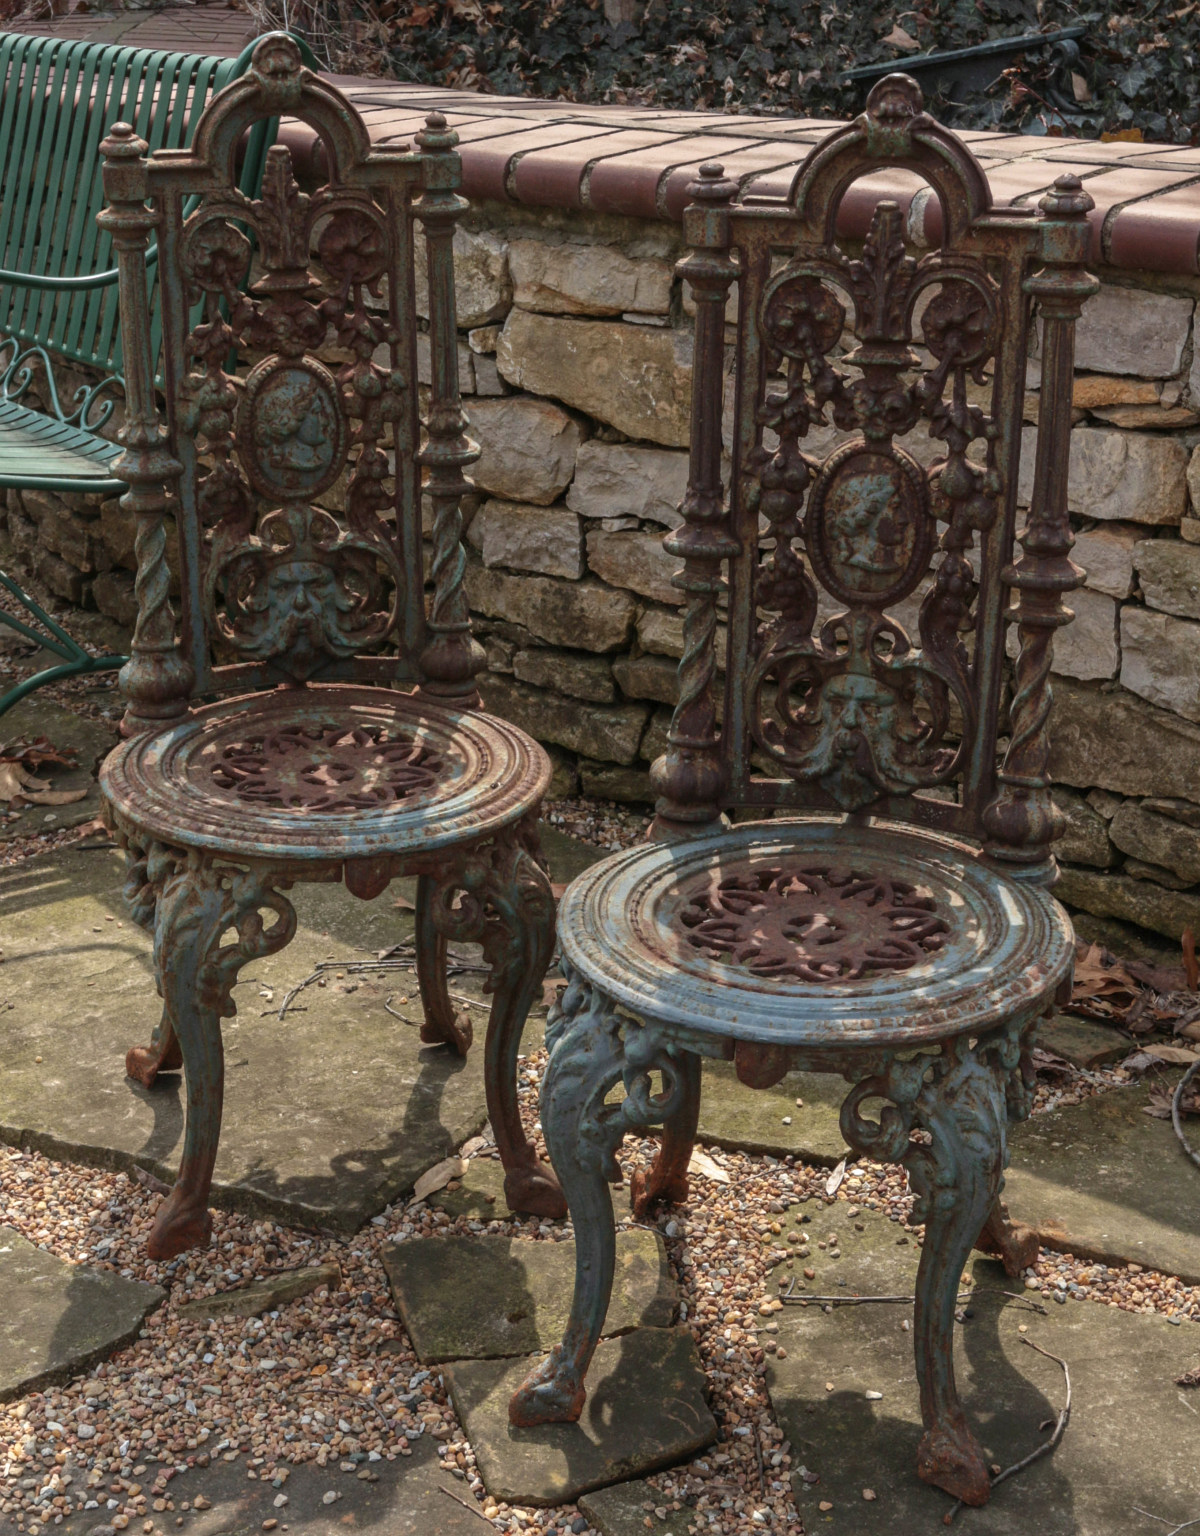 A PAIR OF GOTHIC REVIVAL STYLE IRON GARDEN CHAIRS